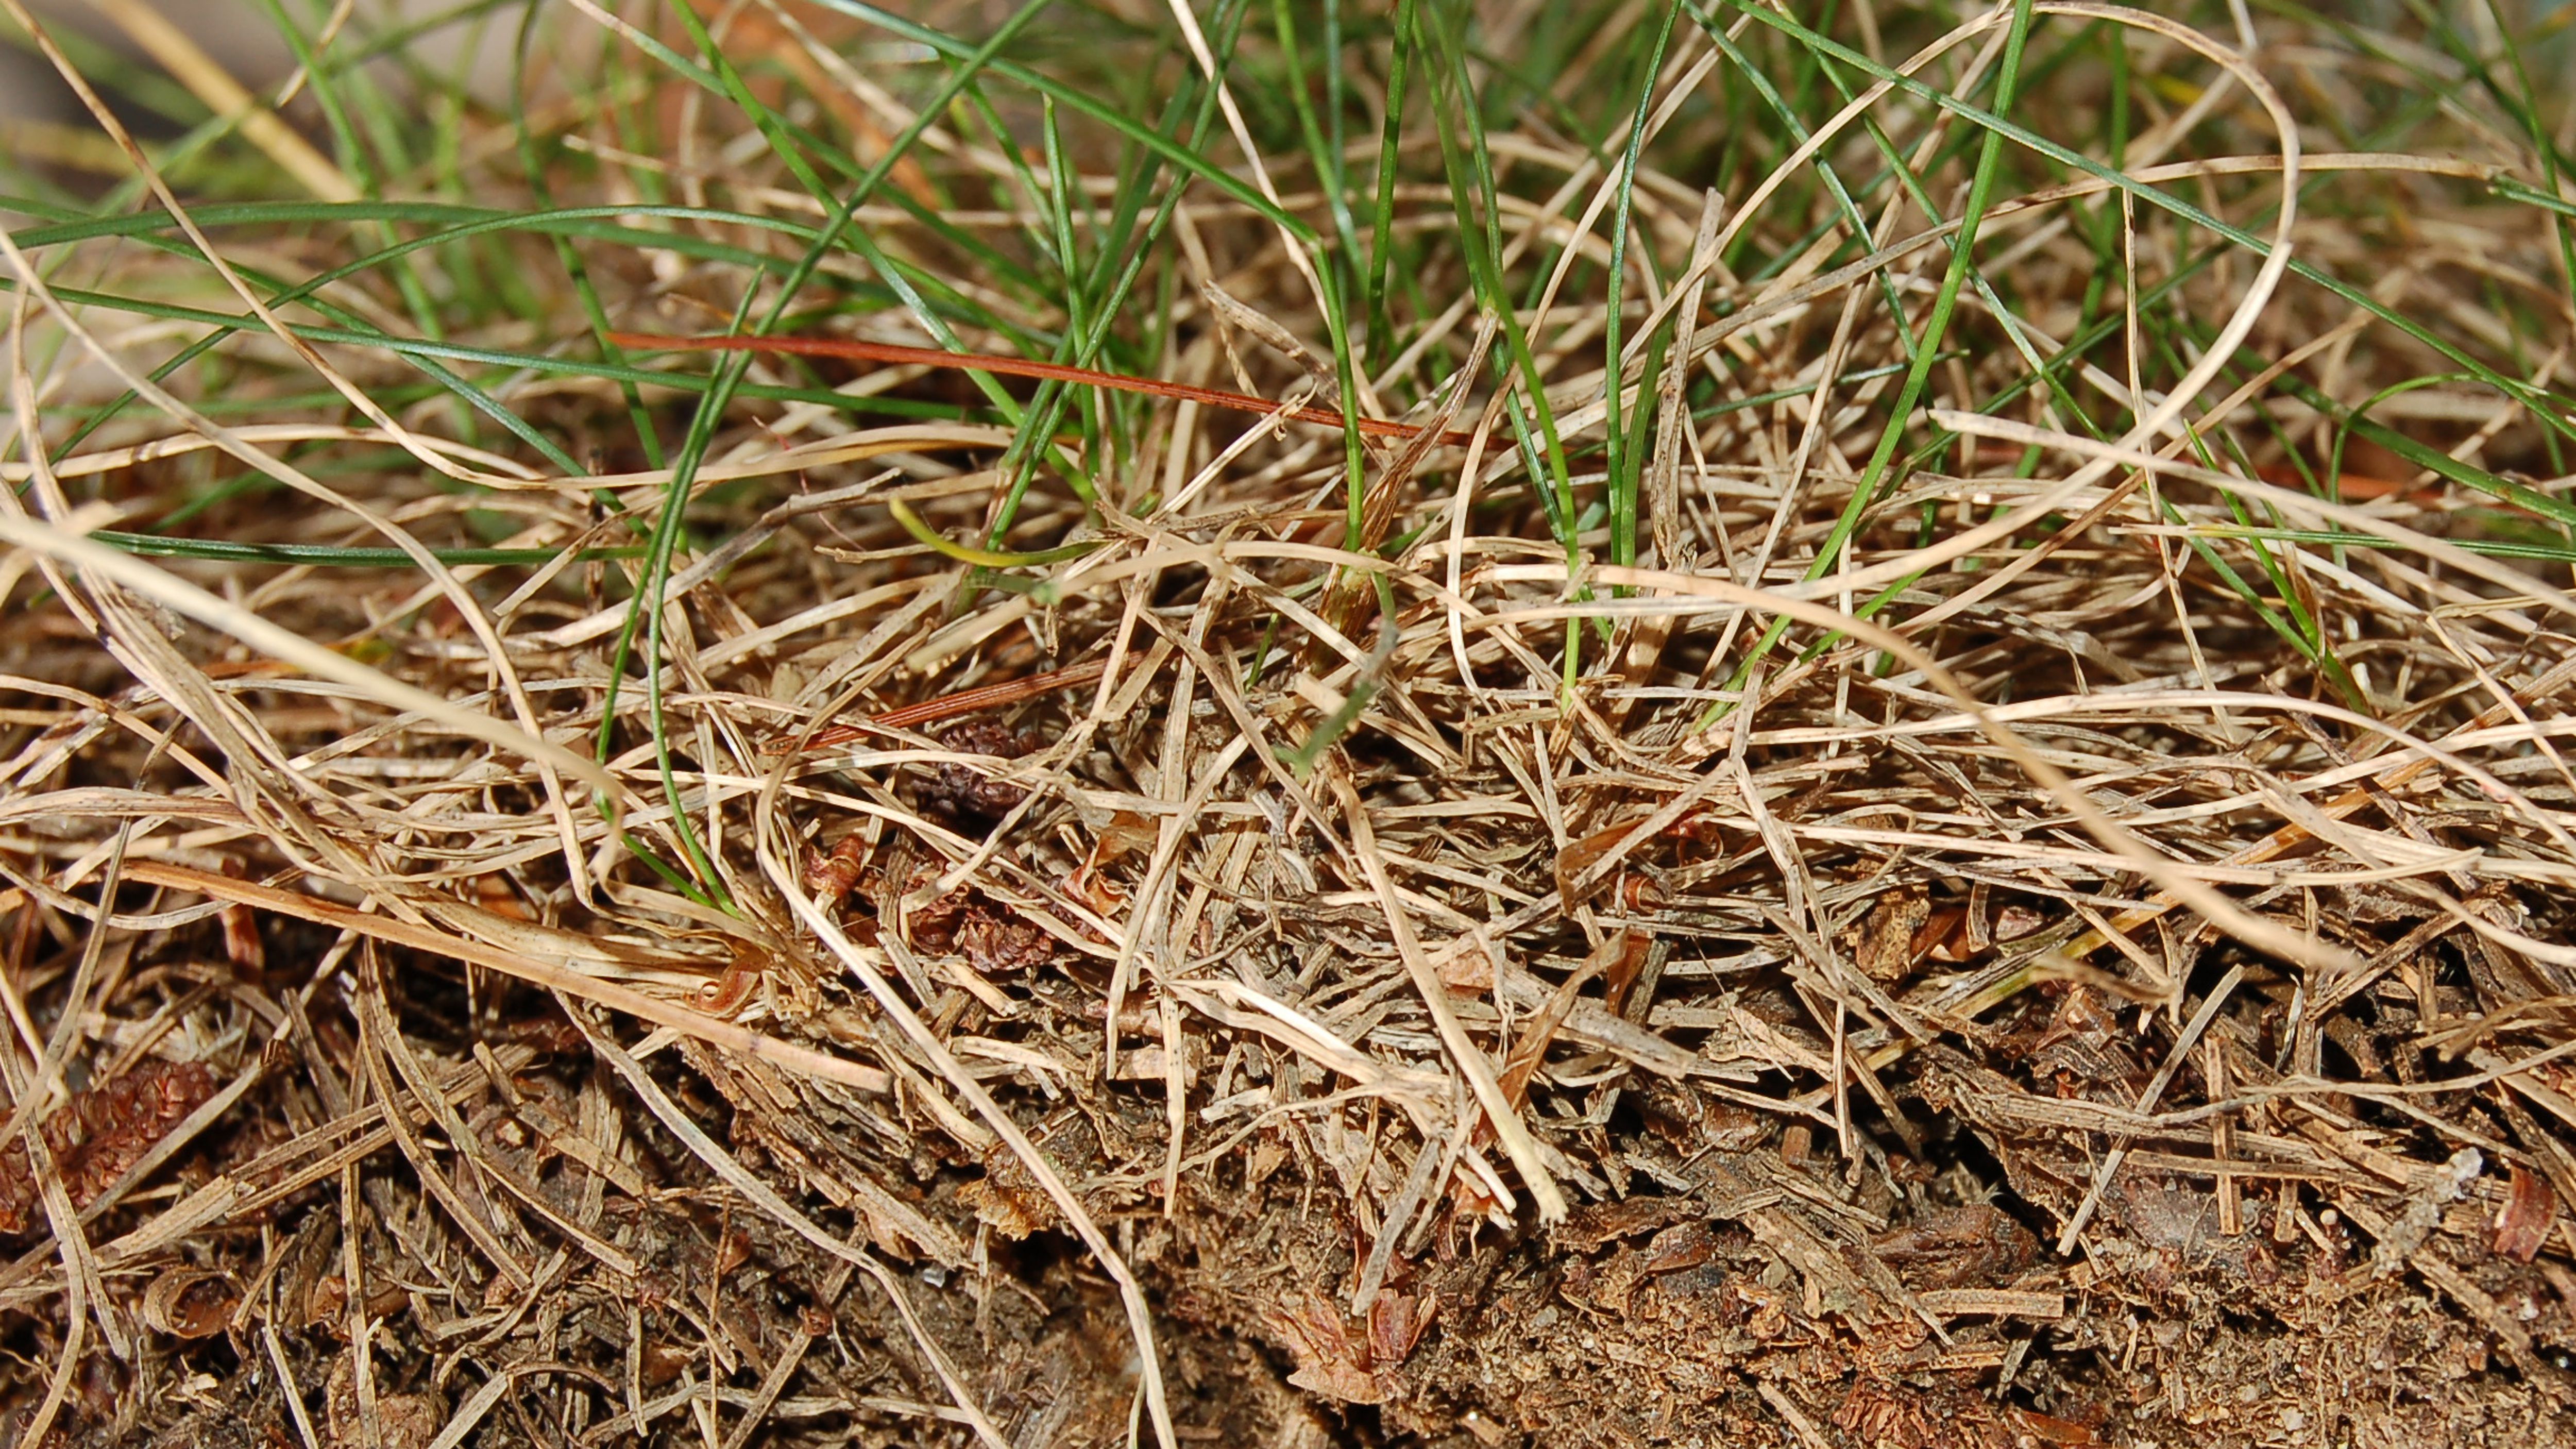 thatch layer beneath the grass and soil beneath